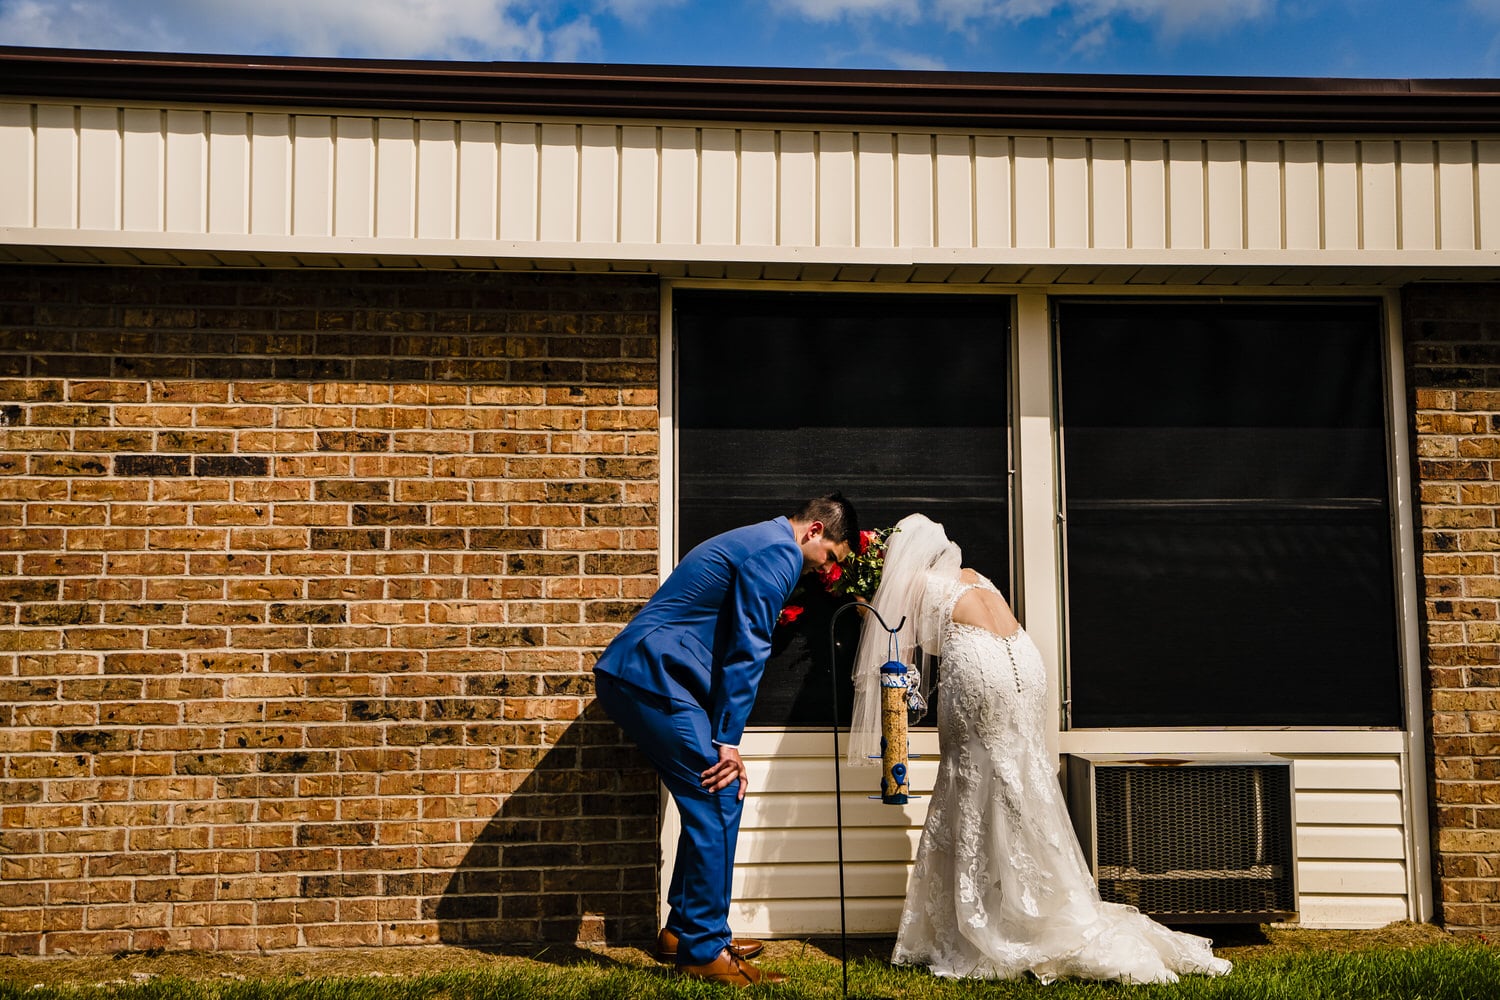 A wide picture of a bride and groom looking into the window of a building. 